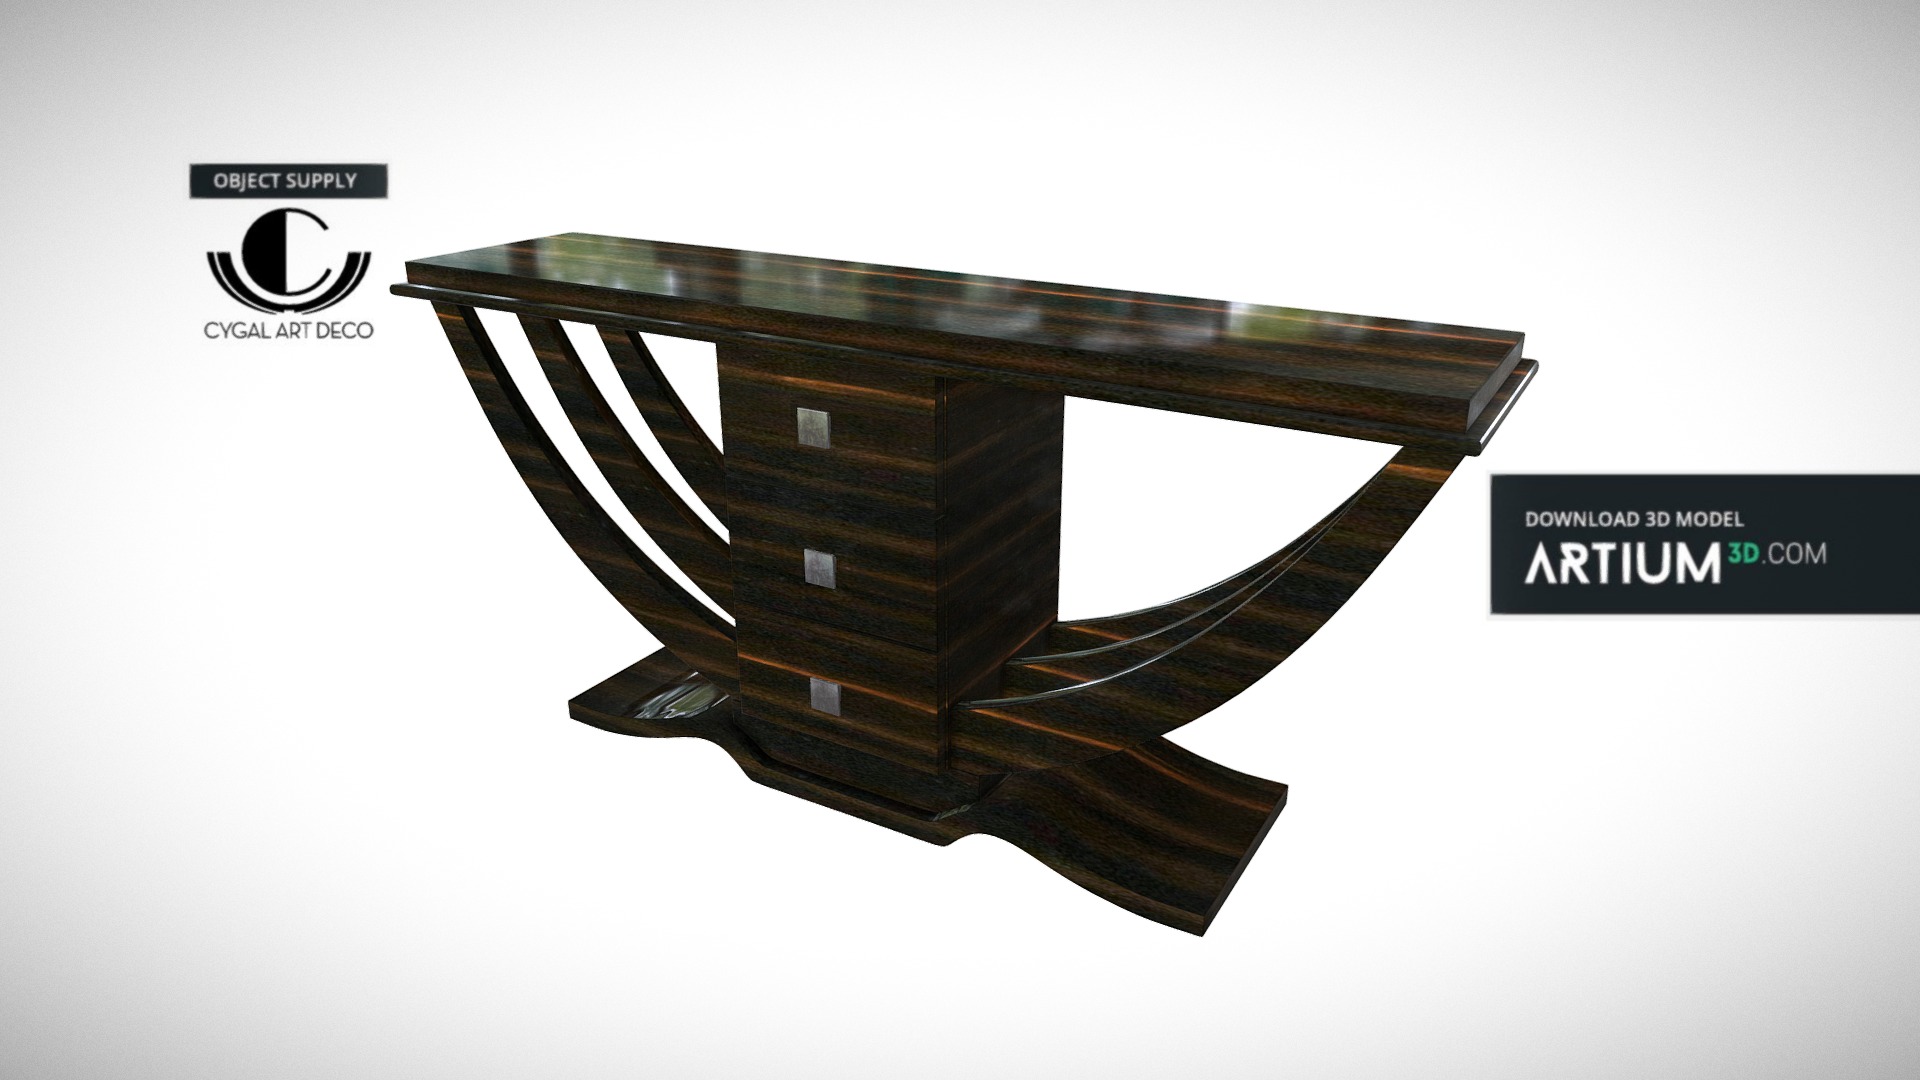 3D model Art Deco Console – Design by Cygal Art Deco - This is a 3D model of the Art Deco Console - Design by Cygal Art Deco. The 3D model is about a wood table with a logo.